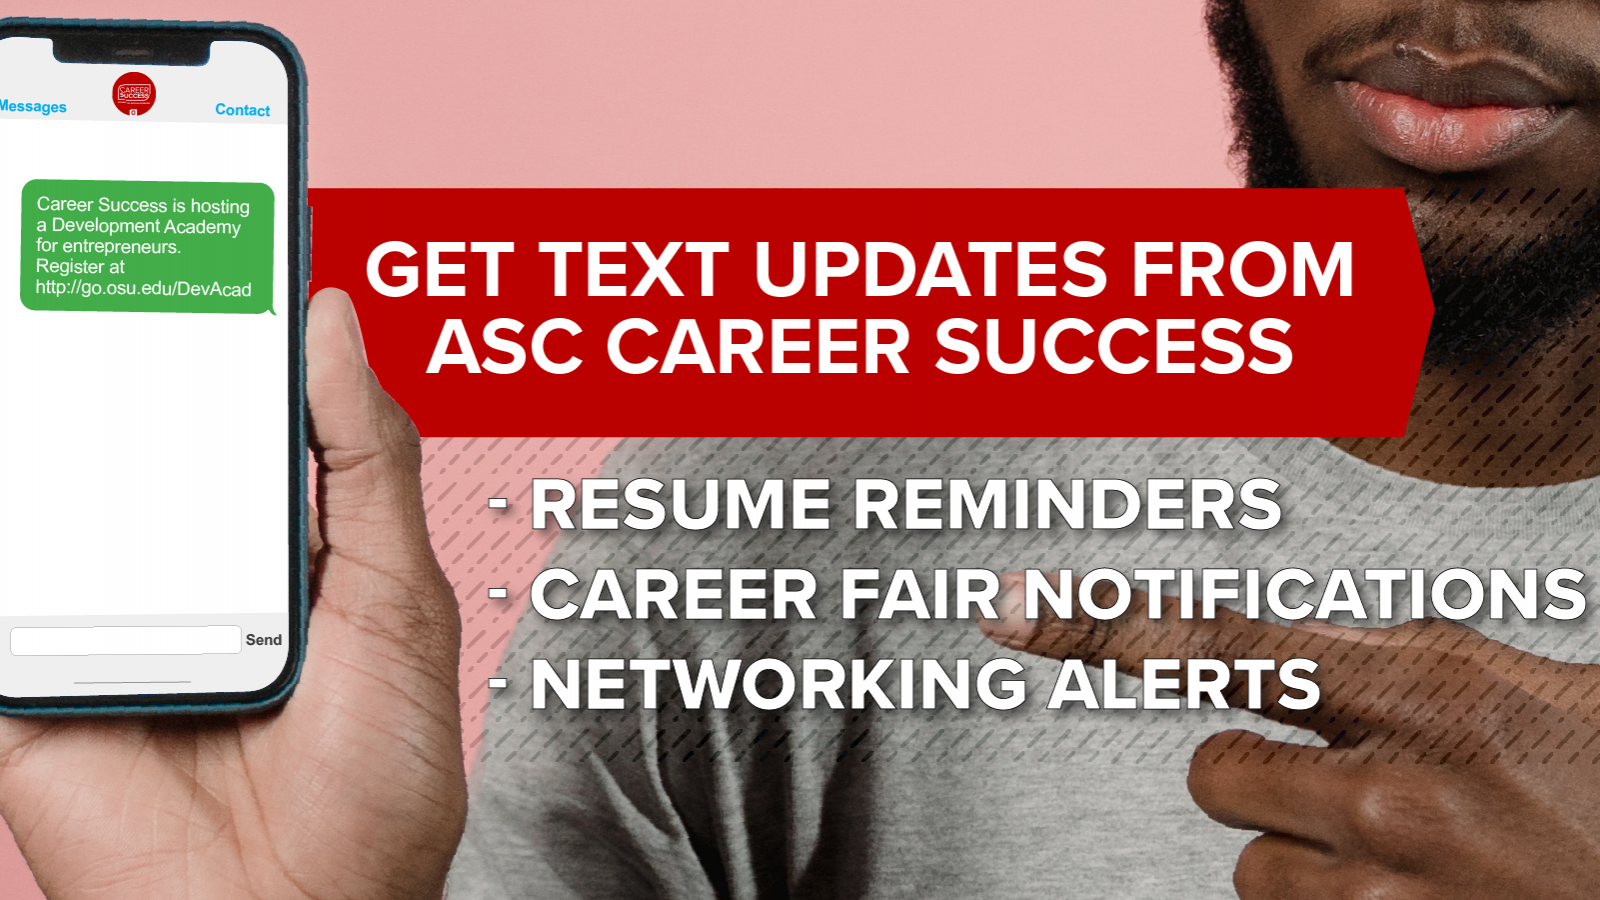 A student holds a phone up. Text on image says "Get Text updates from ASC Career Success"